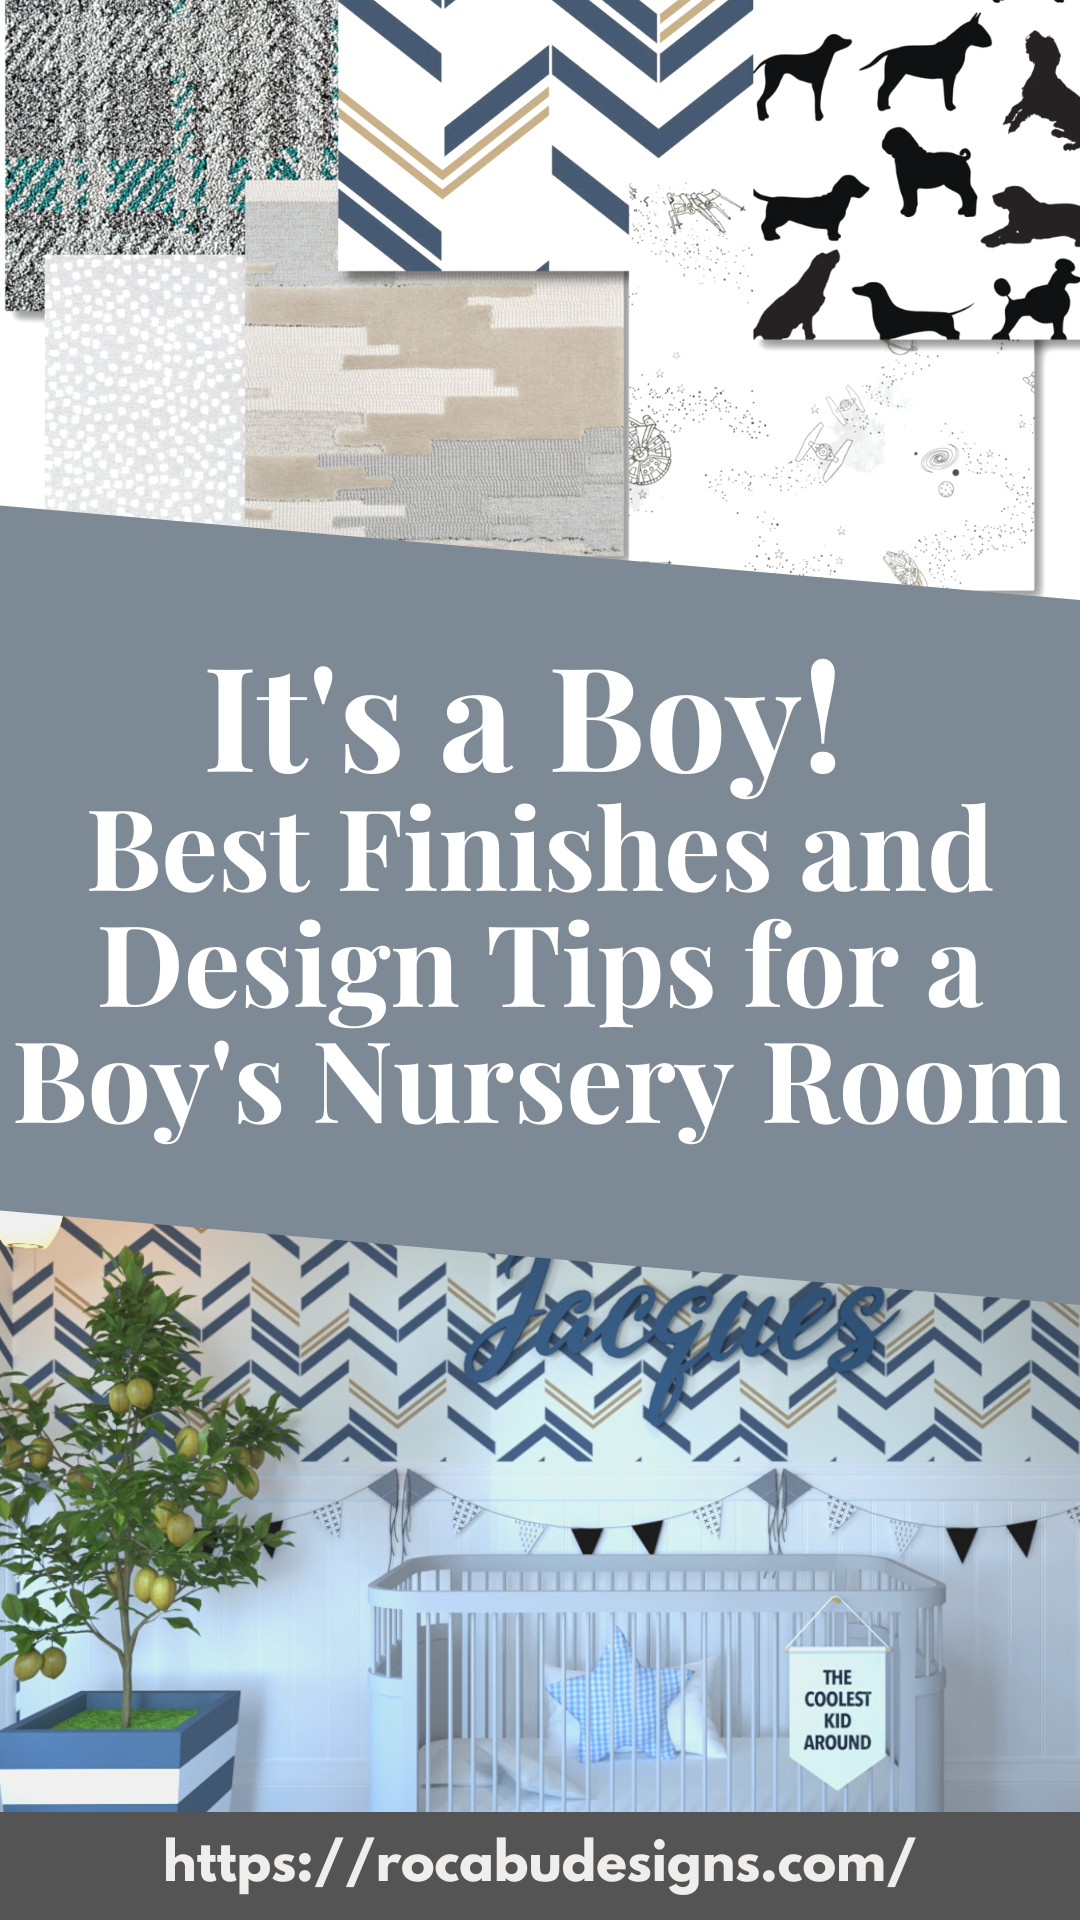 Blog cover for design tips and best finishes to use in a boy's nursery room